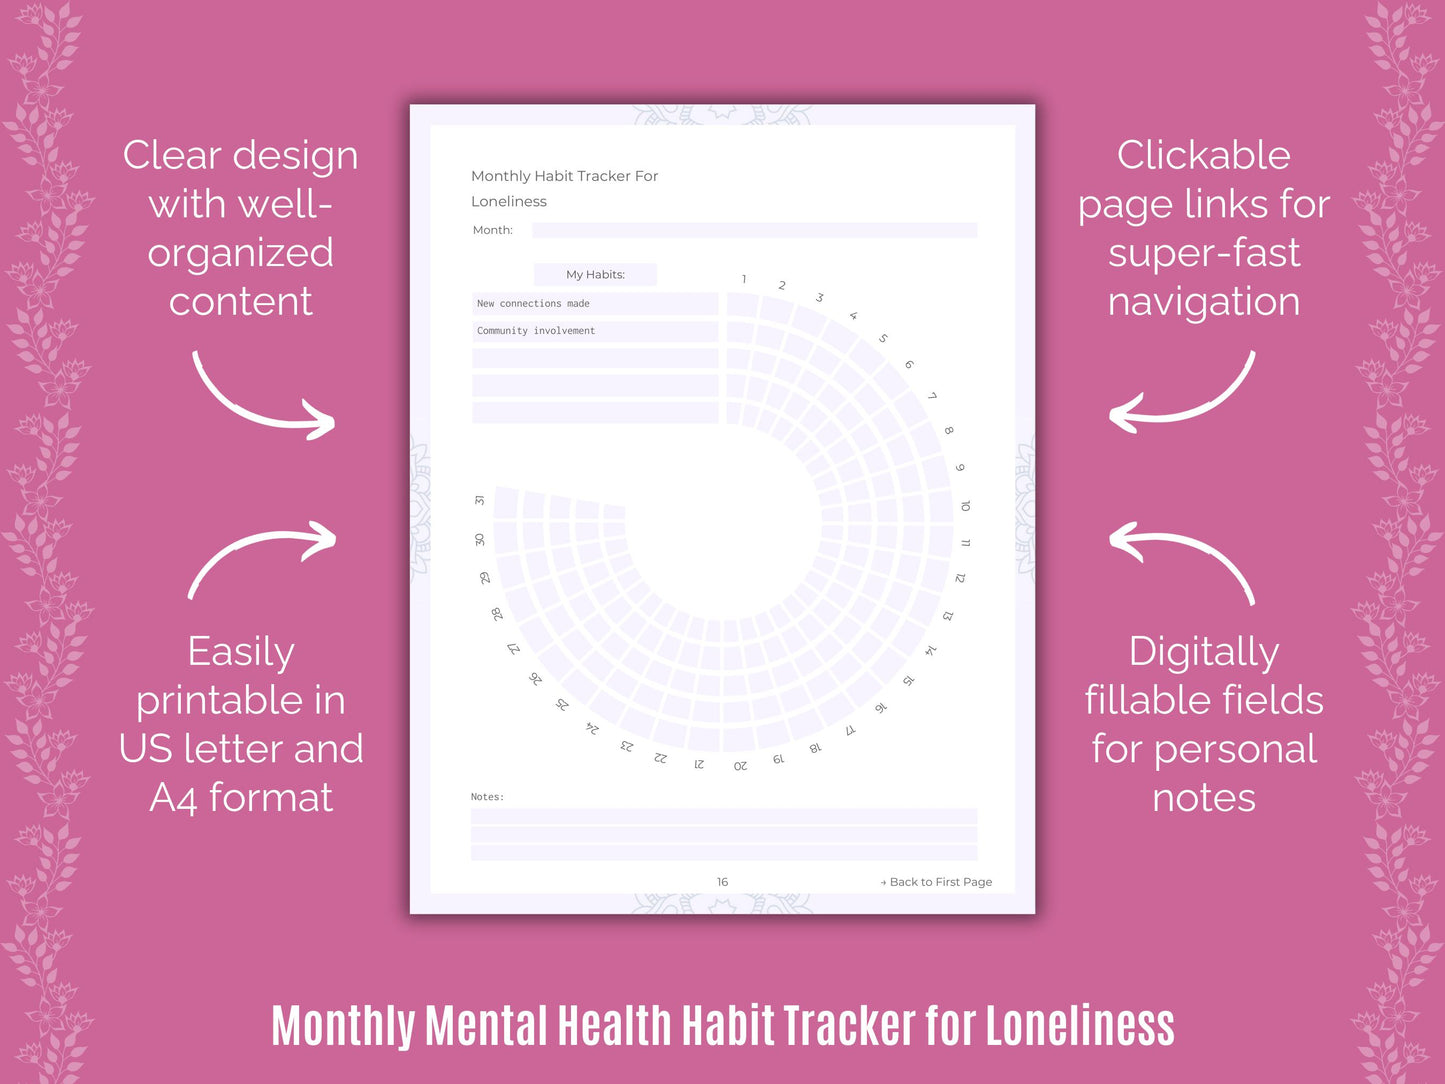 Loneliness Journals, Loneliness Planners, Loneliness Therapy, Journaling, Loneliness Workbooks, Loneliness Notes, Loneliness Tools, Loneliness Templates, Goal Setting, Loneliness Resources, Cheat Sheet, Counseling, Loneliness Mental Health